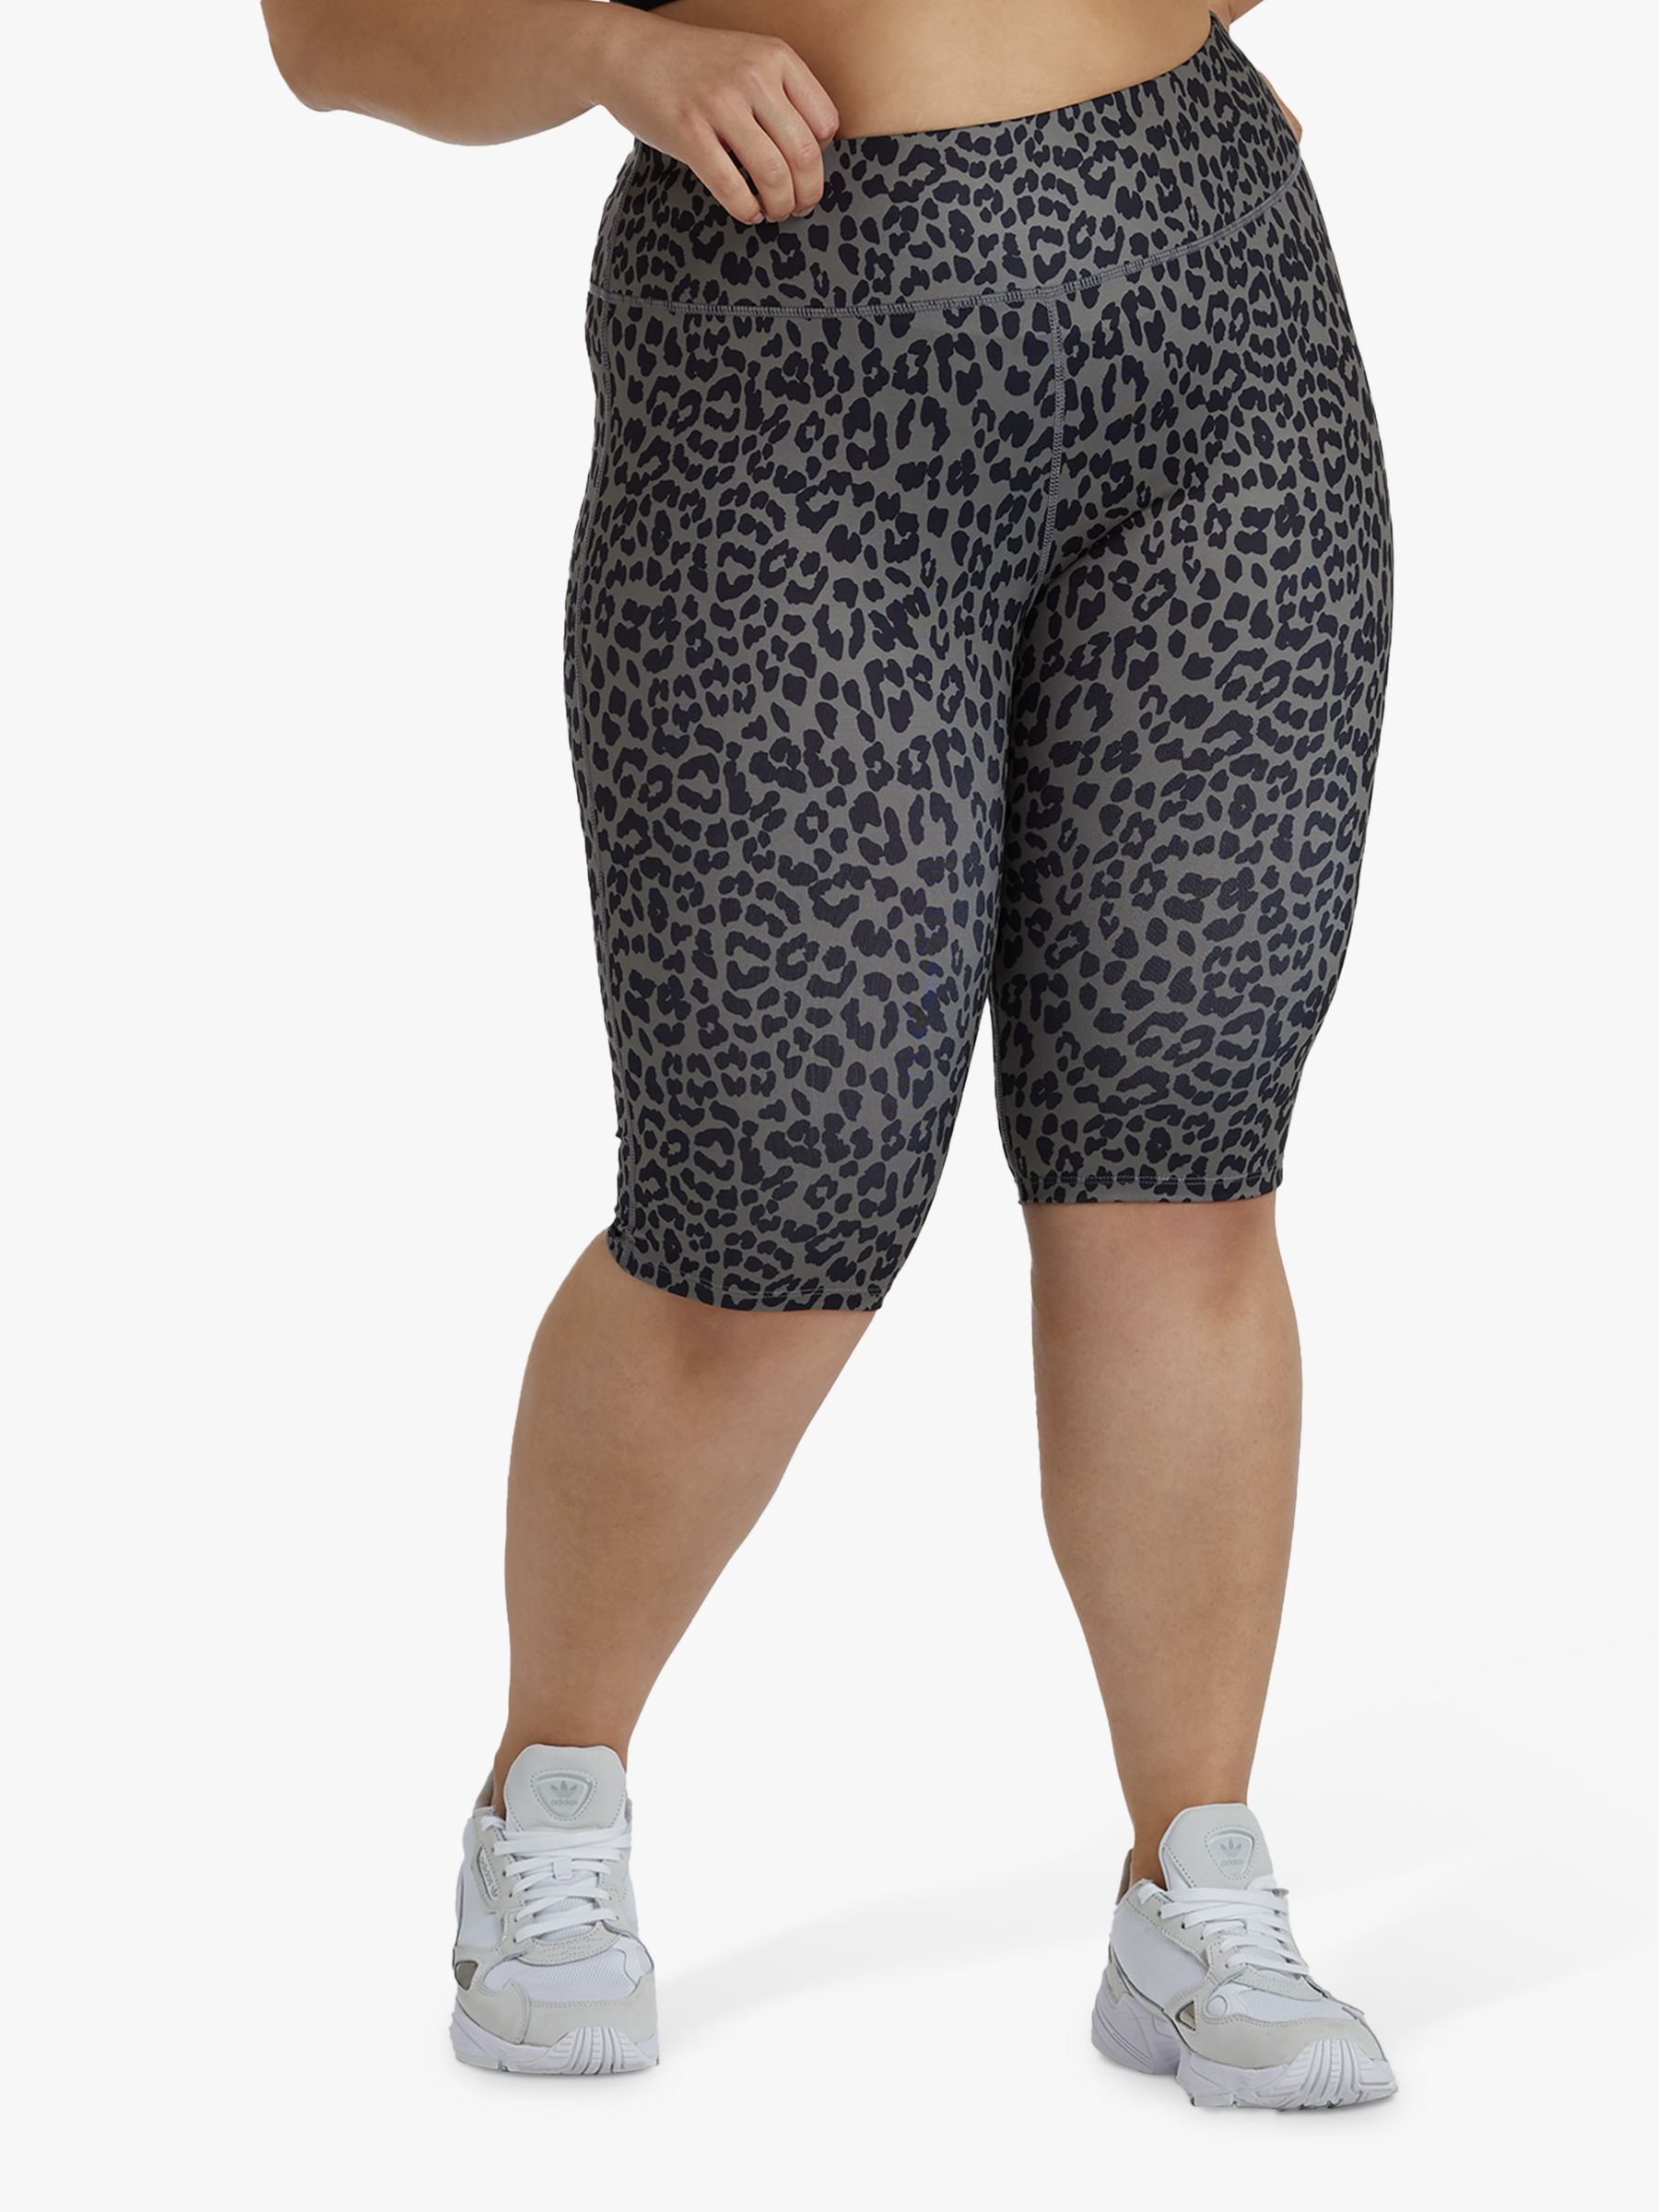 Wolf & Whistle Curve Leopard Shorts, Dusty Olive, 18